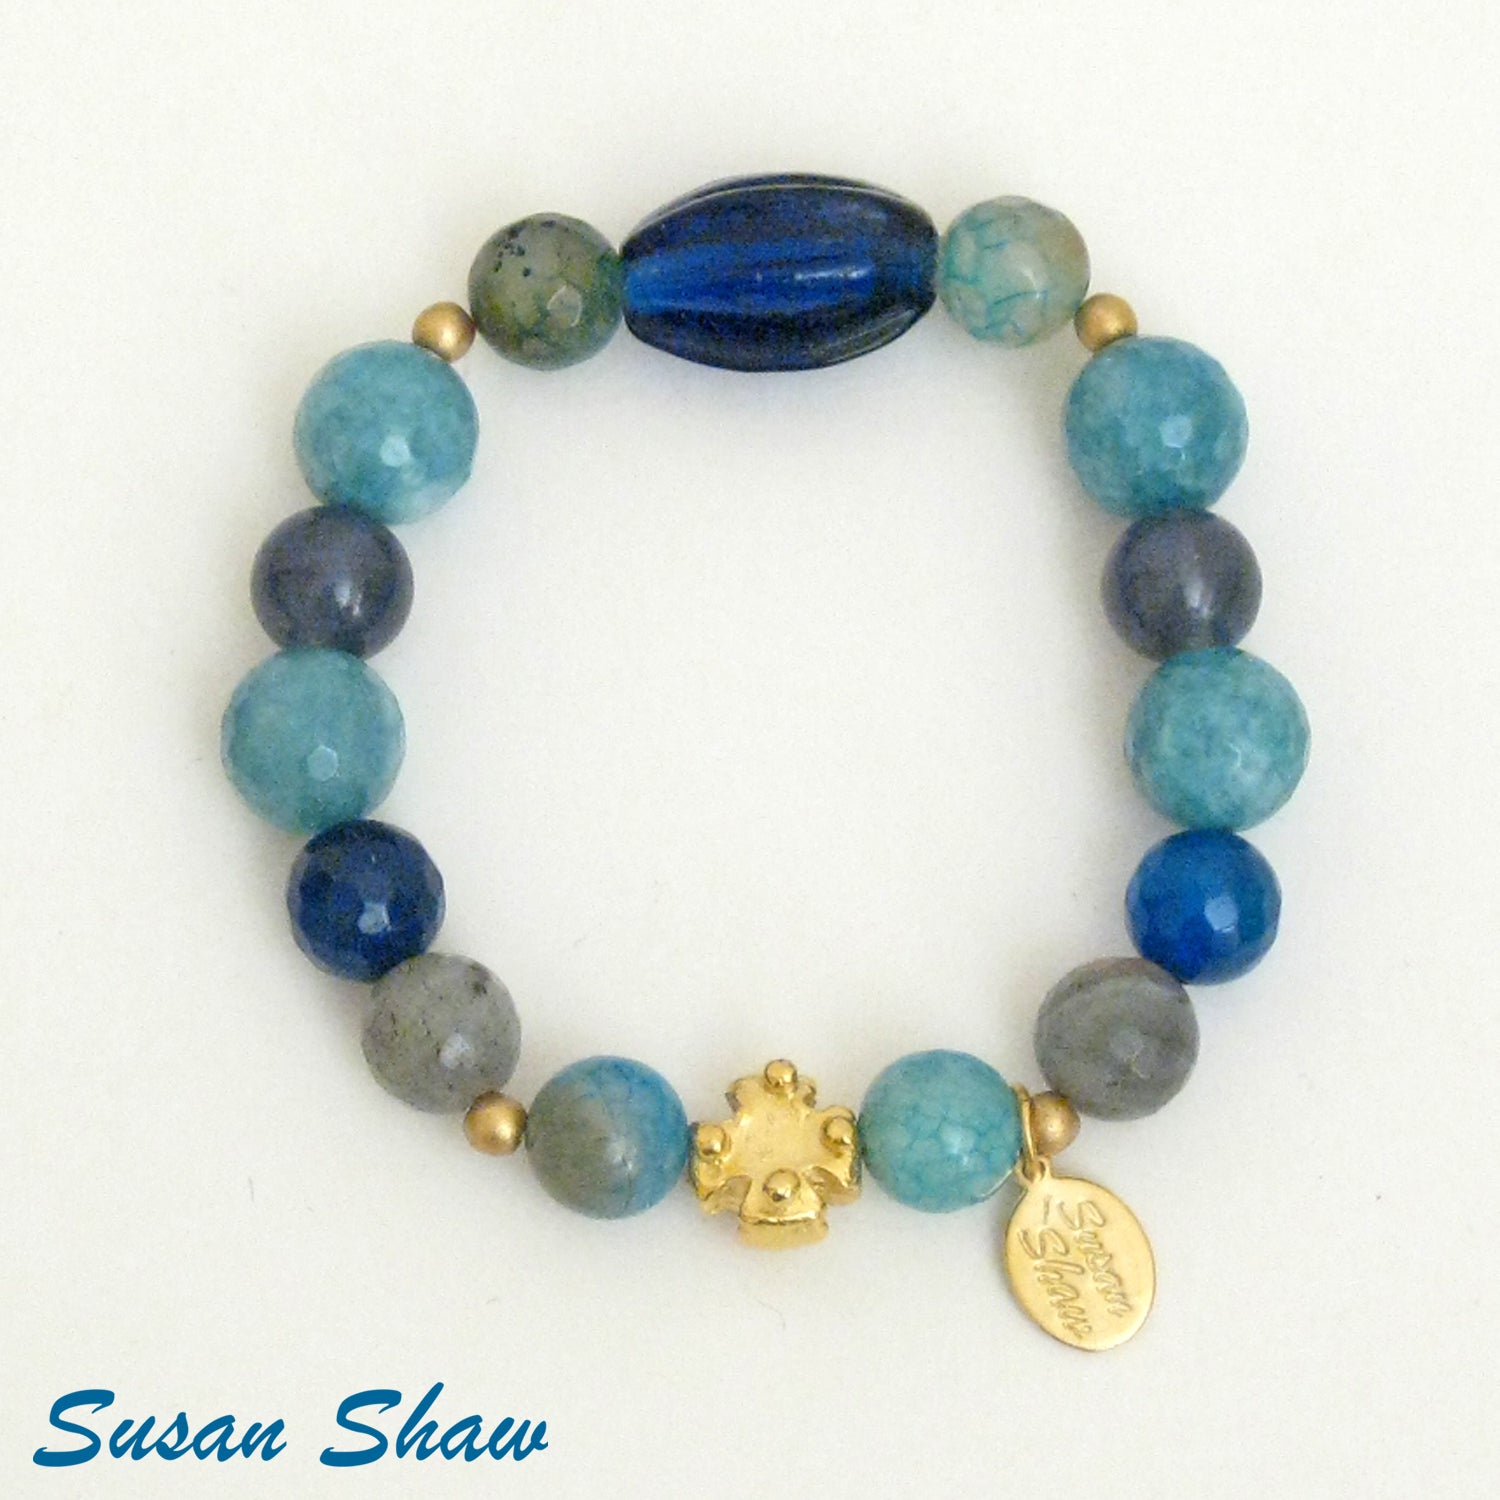 Susan Shaw Cross Multi Agate Tennis Bracelet with Toggle Clasp, Gold Plated 8"